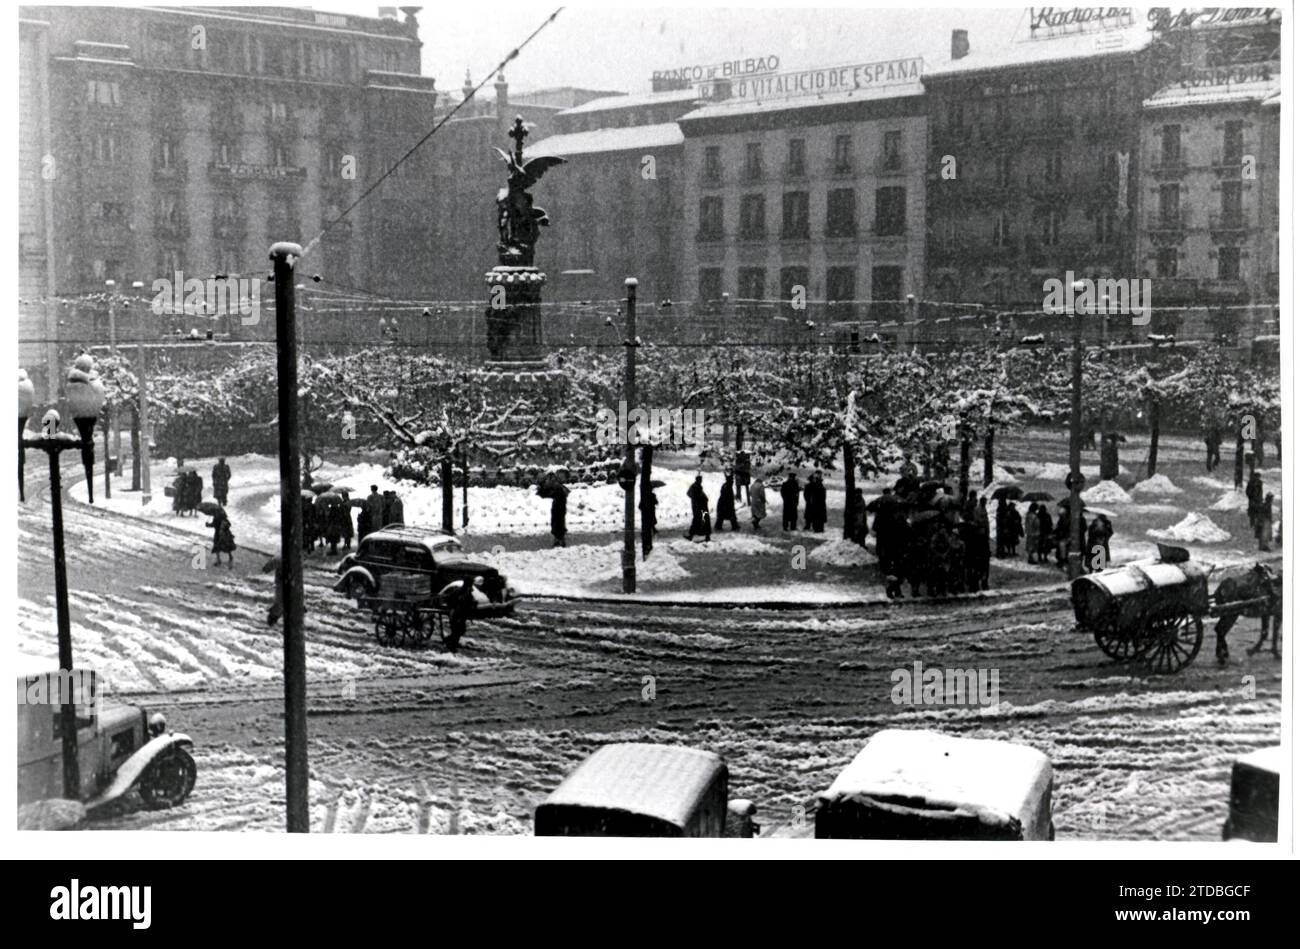 12/31/1950. The Plaza de España after the Snowfall - Approximate date. Credit: Album / Archivo ABC / Miguel Marín Chivite Stock Photo